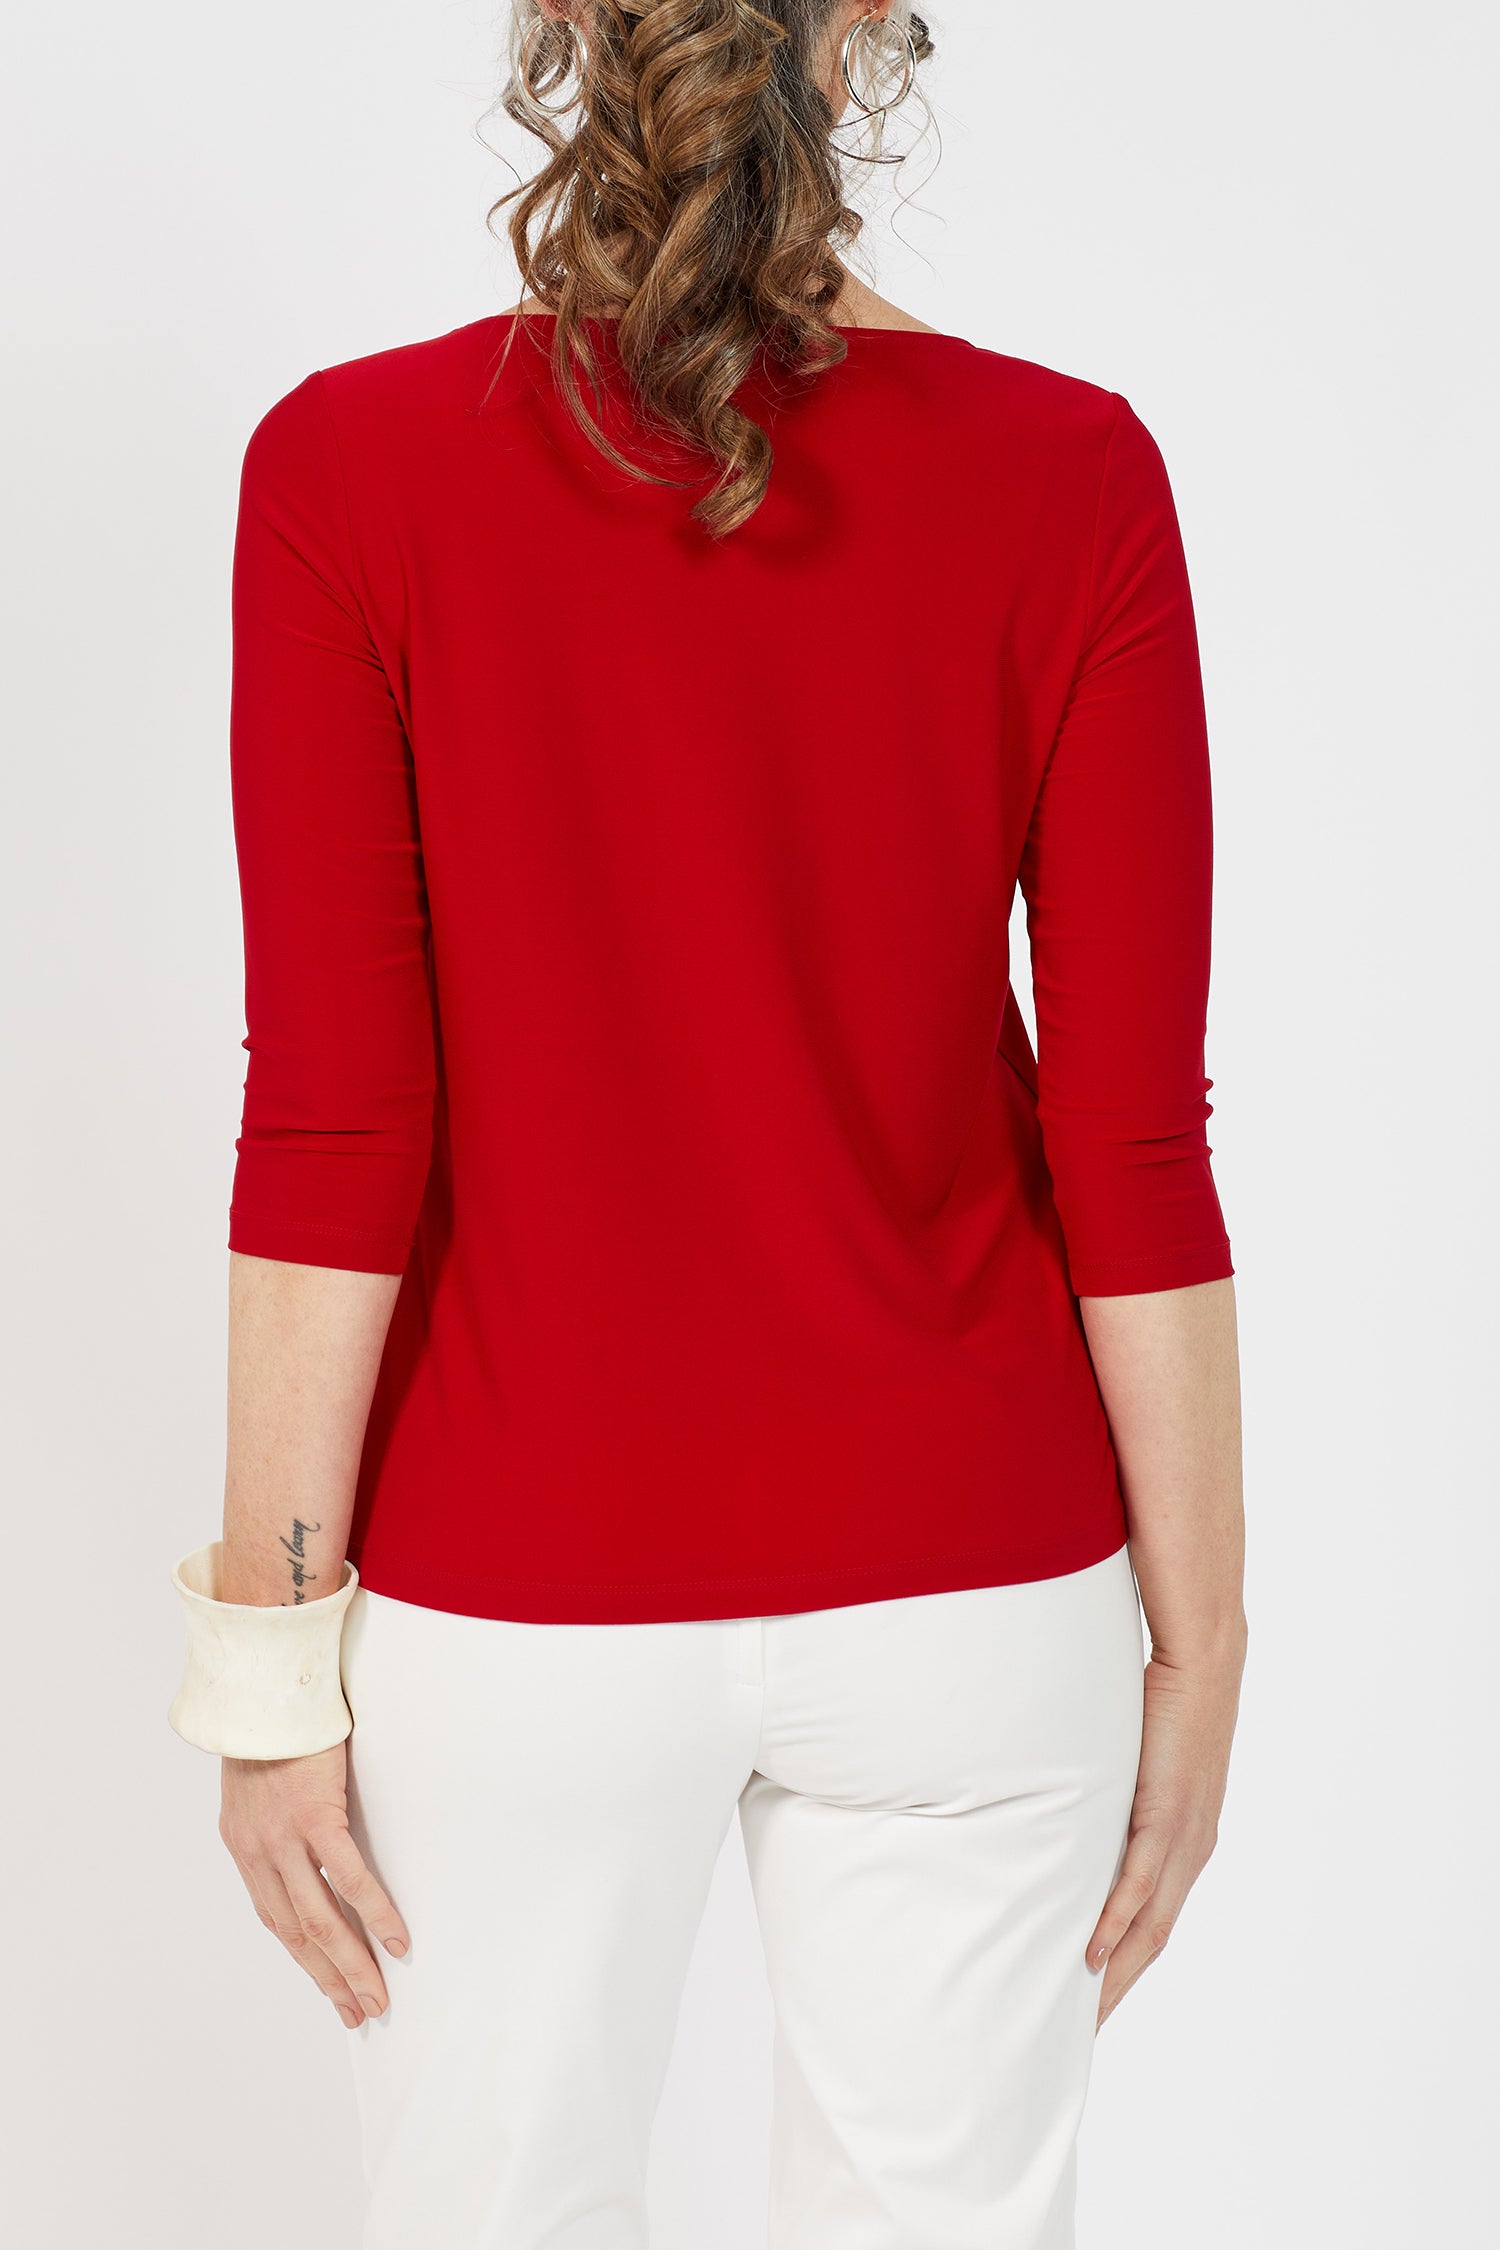 Voyager ¾ Boat Neck Top